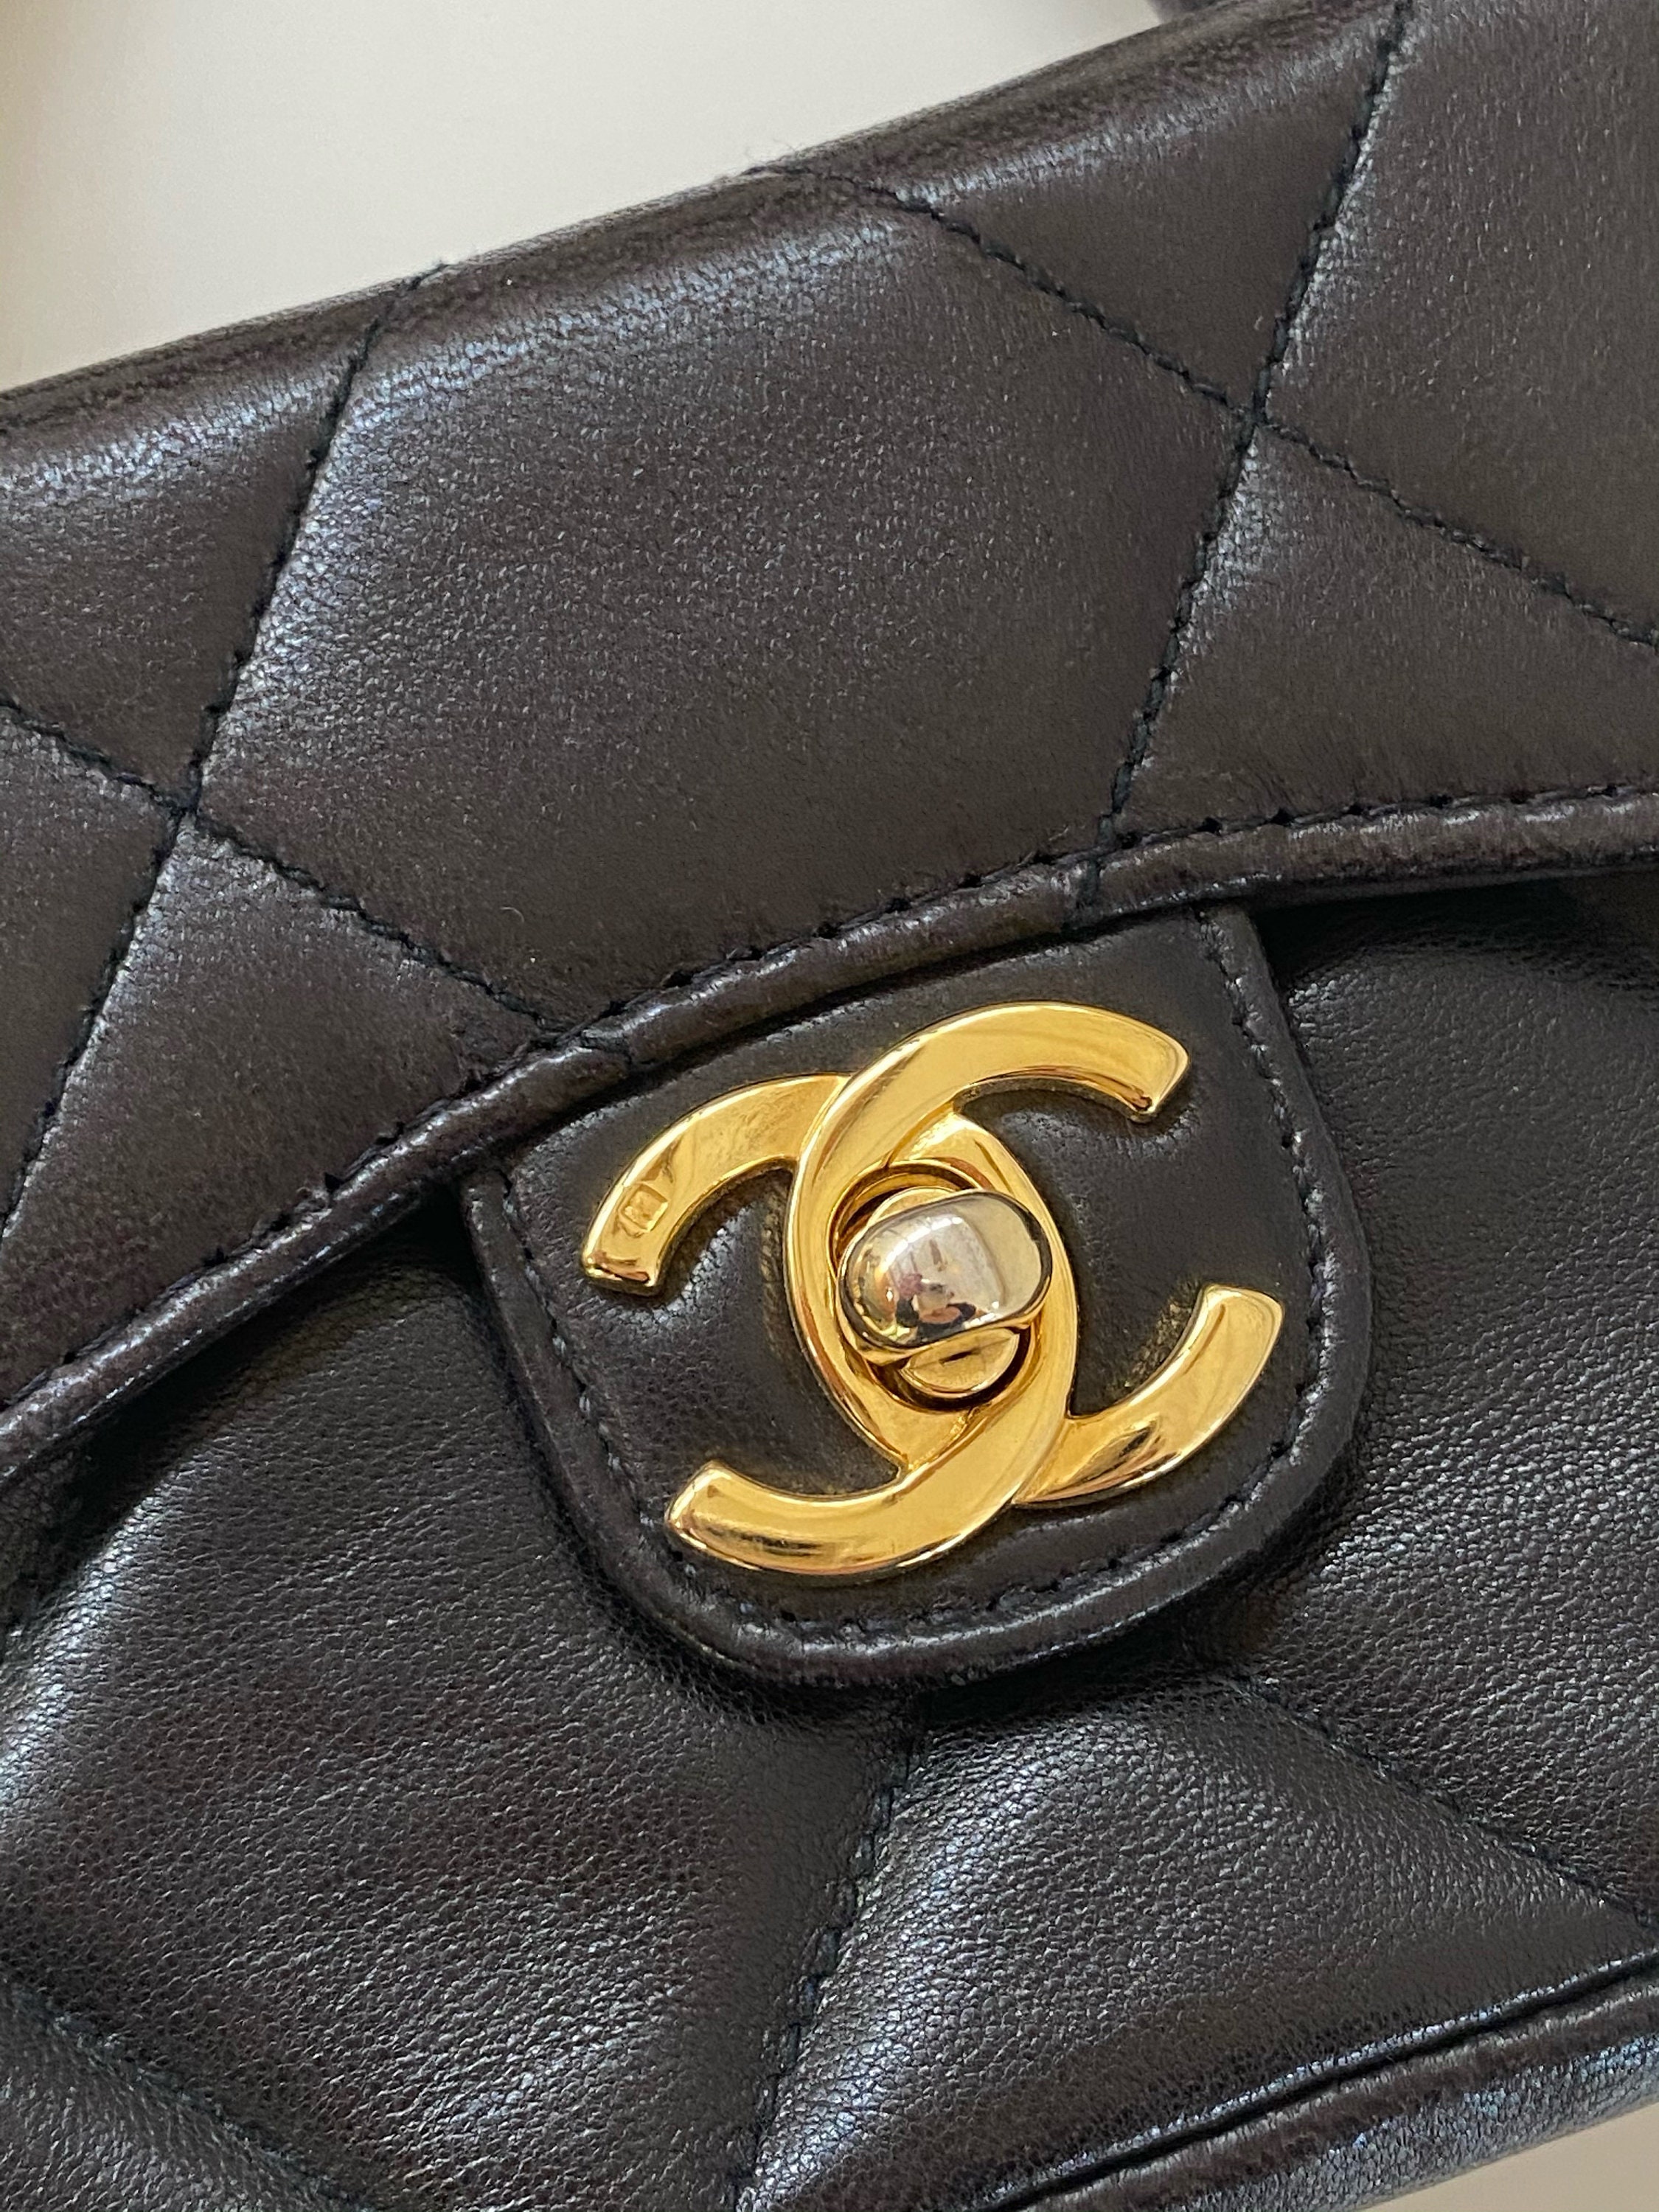 Vintage CHANEL CC Logo Turnlock MICRO Mini Brown Quilted 